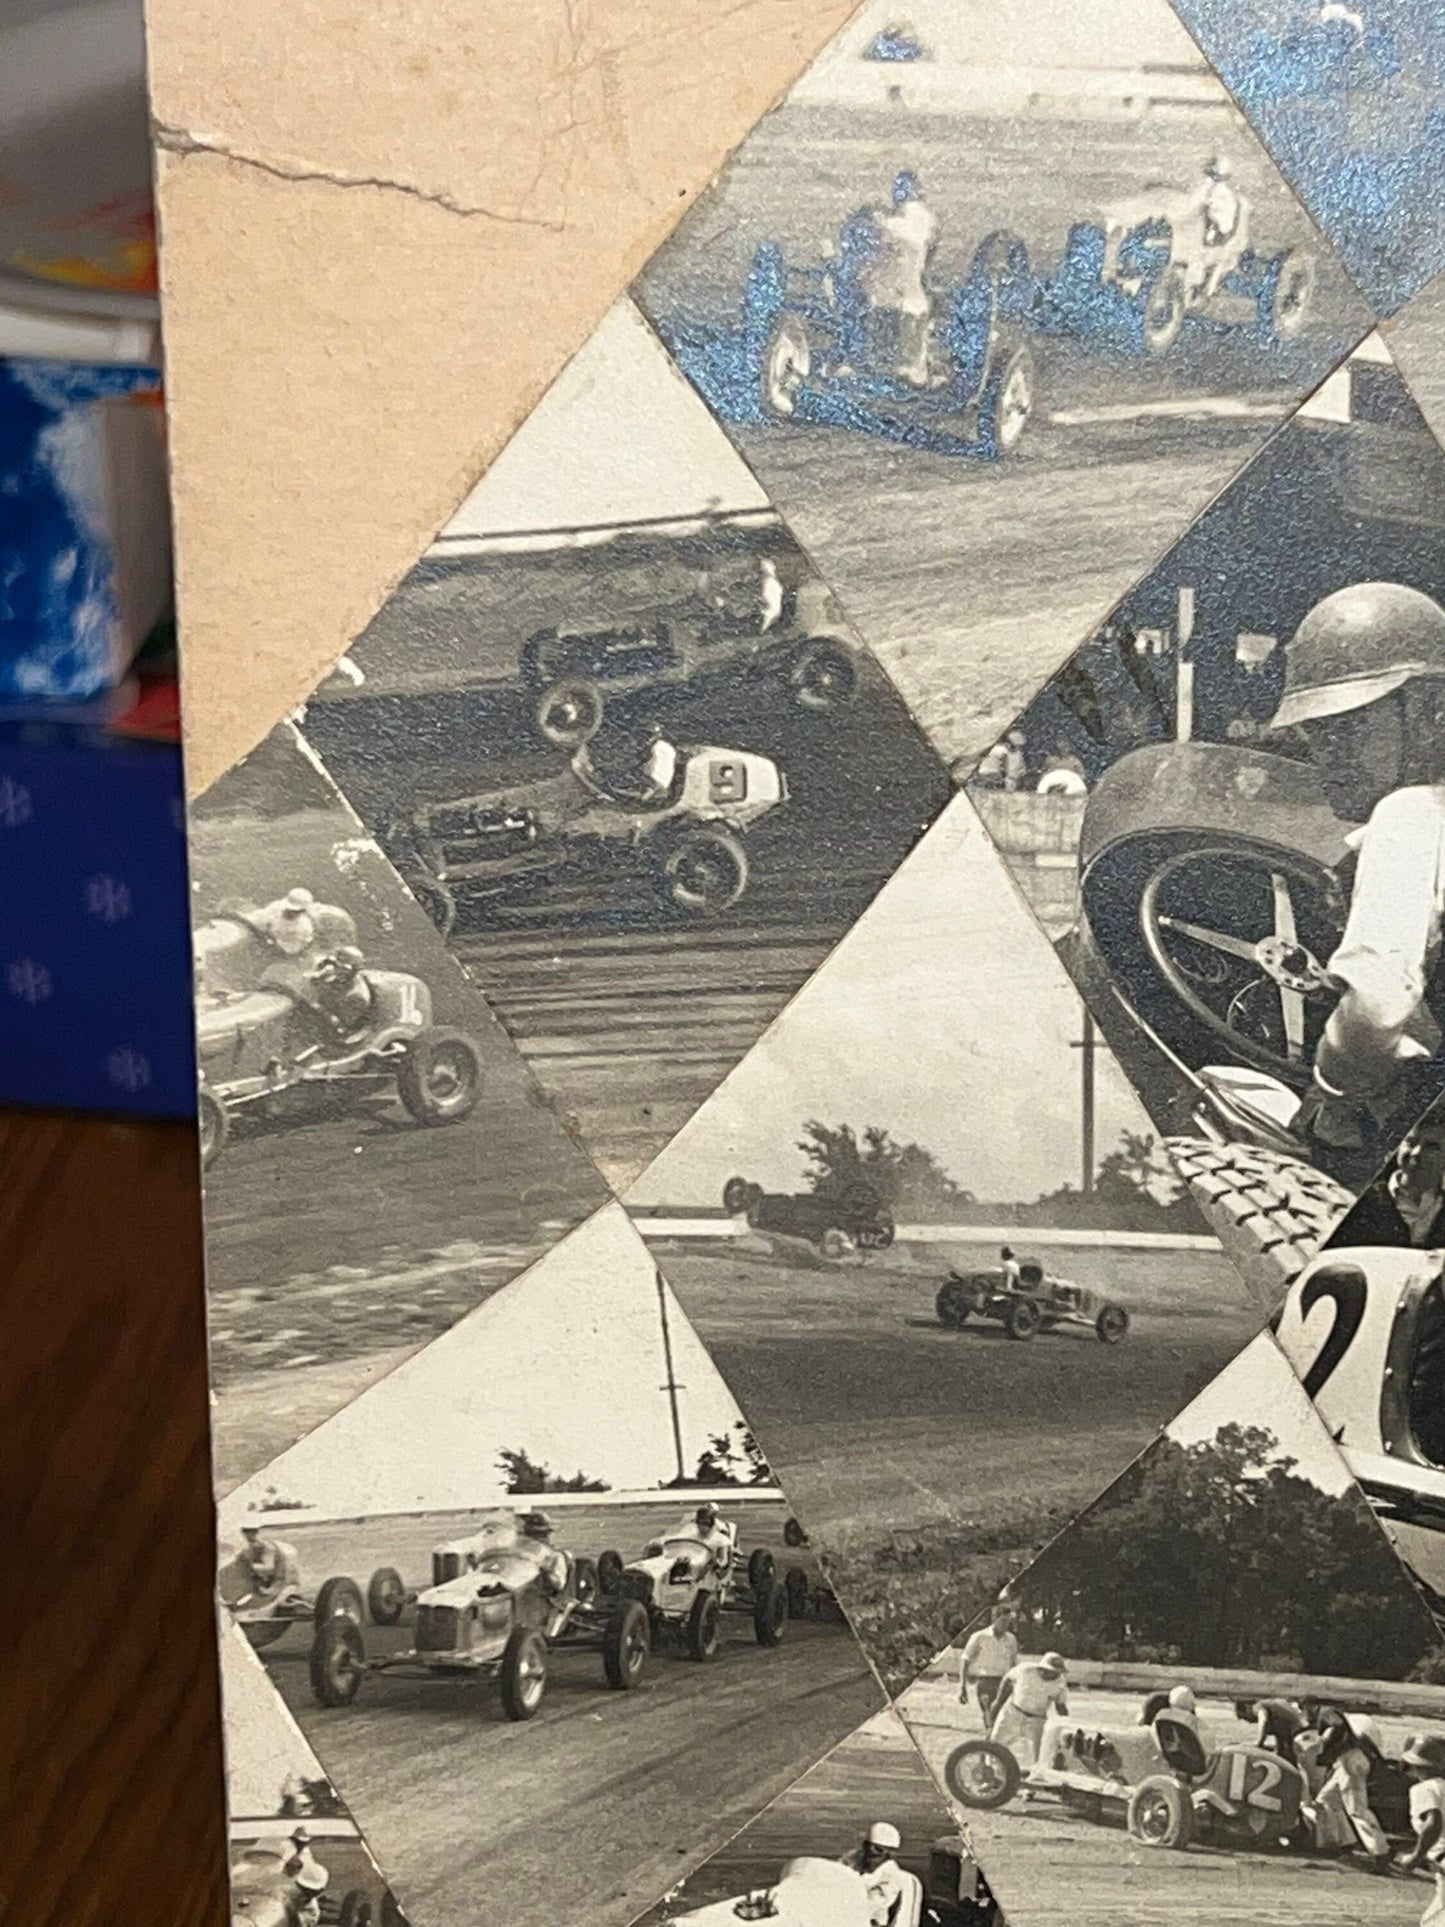 Antique racing photo early automobiles race car mounted photo 1920s collage